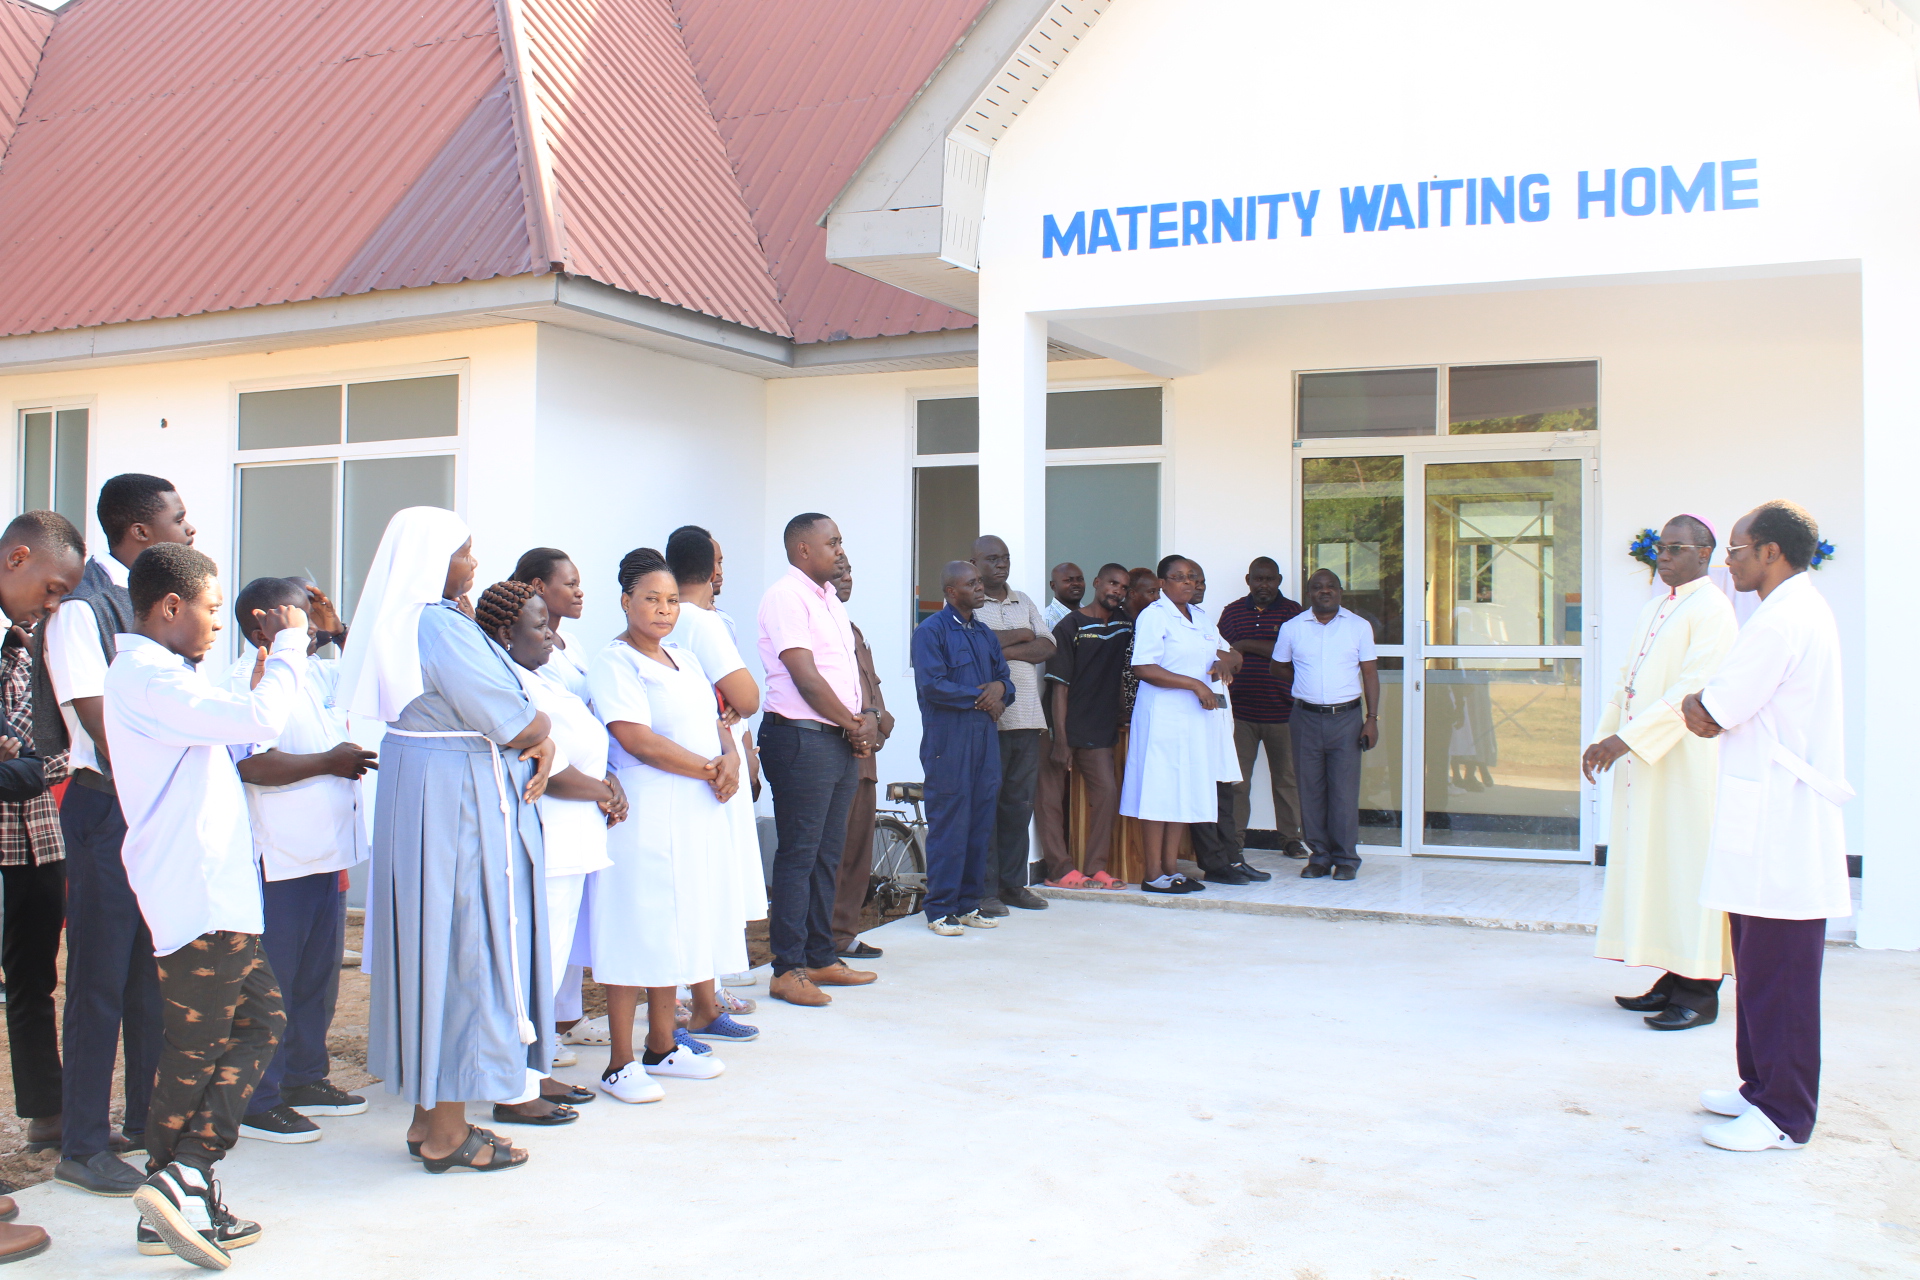 Bishop SALUTARIS MELCHIOR LIBENA open a new building for the maternity waiting home at St Francis regional referral hospital ifakara.